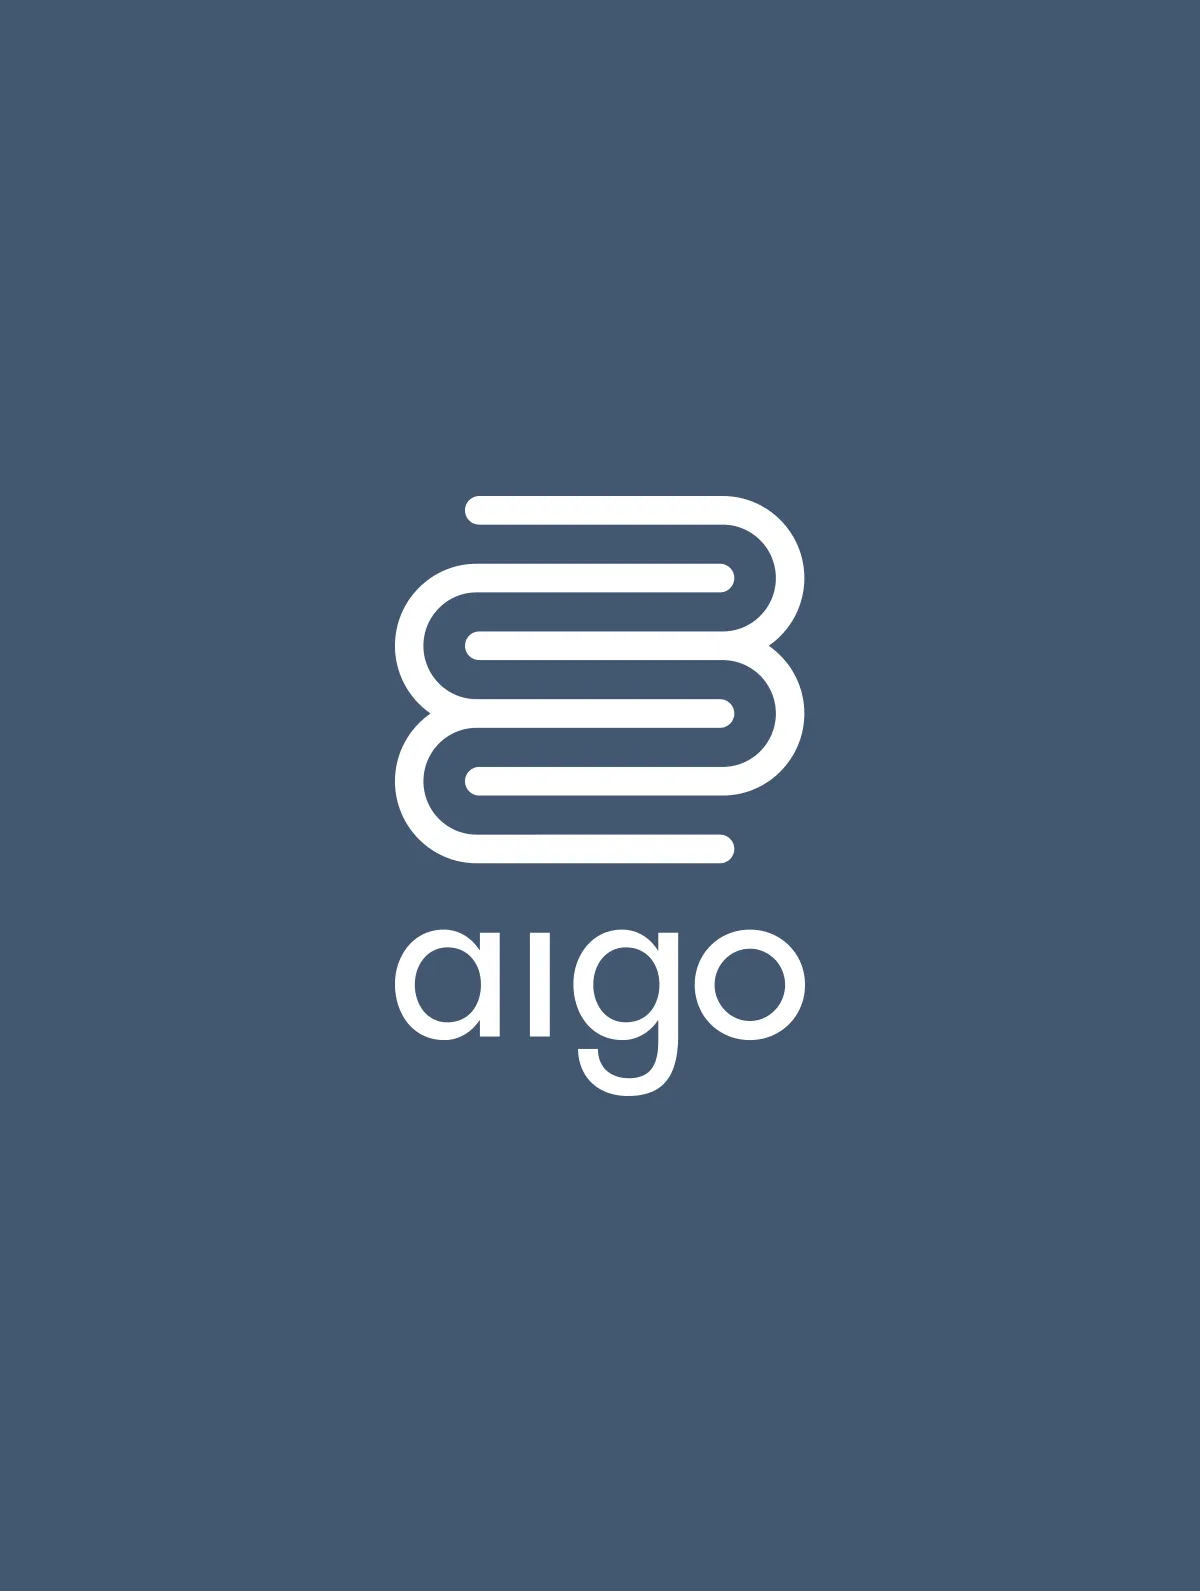 Aigo - New look for a long-standing healthcare institution. - By HDG